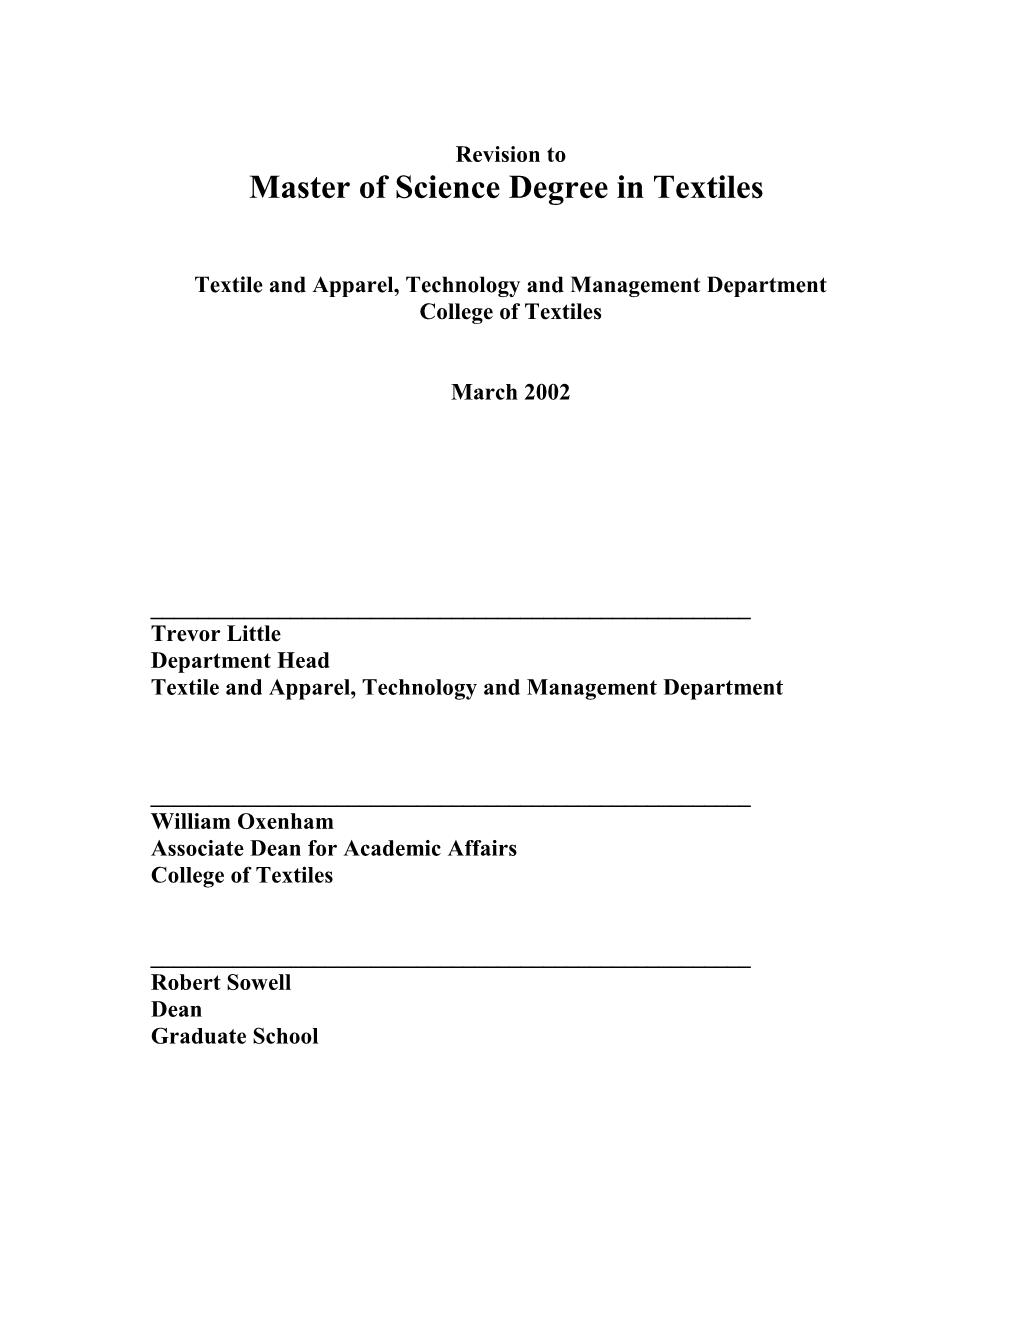 Master's of Science in Textiles